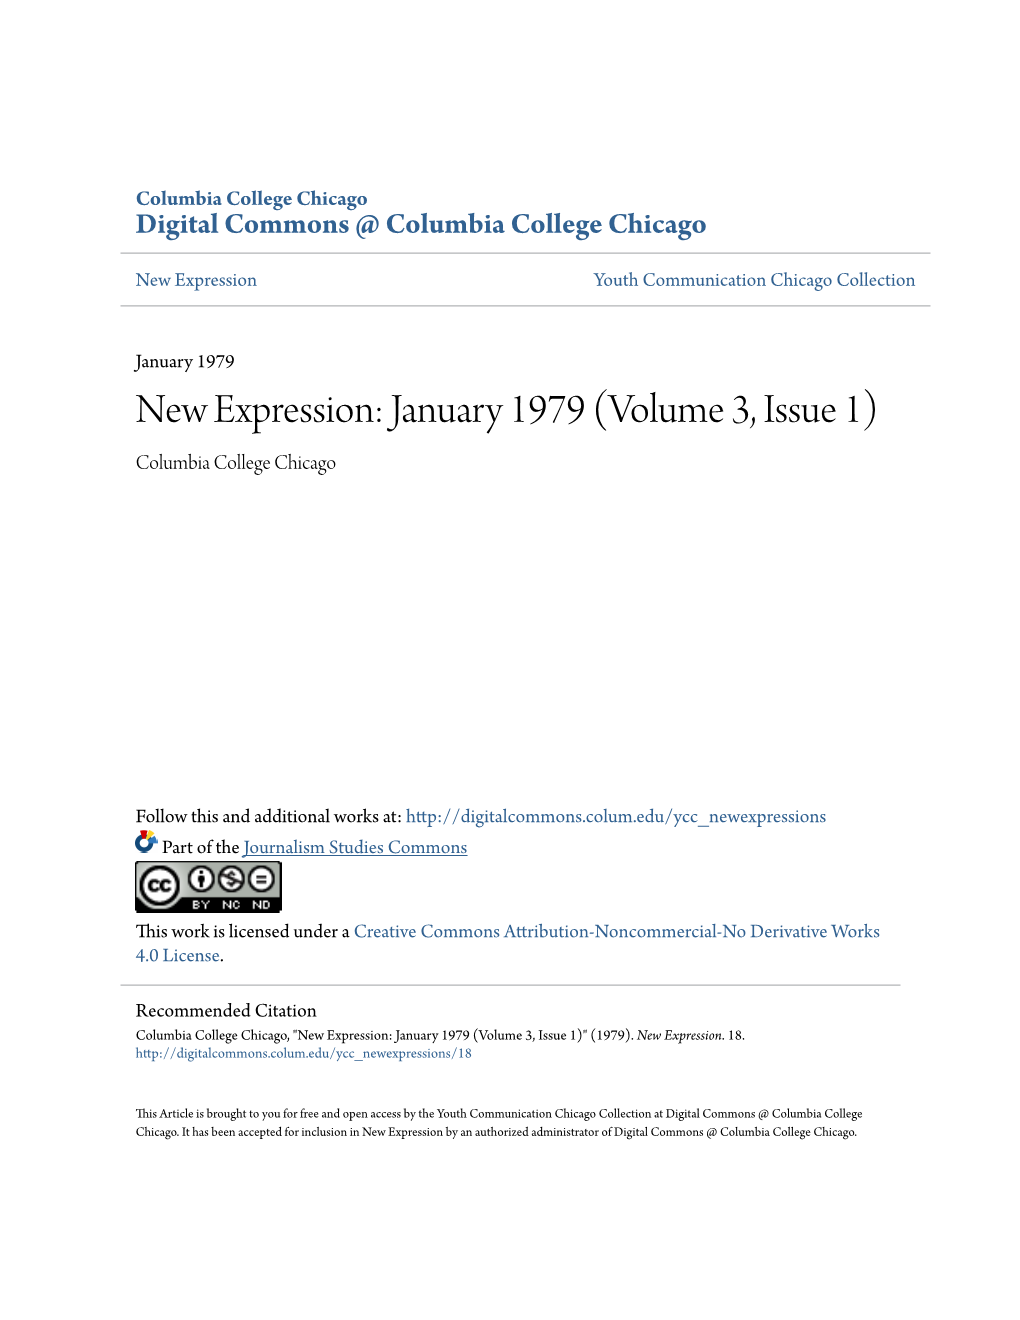 New Expression: January 1979 (Volume 3, Issue 1) Columbia College Chicago